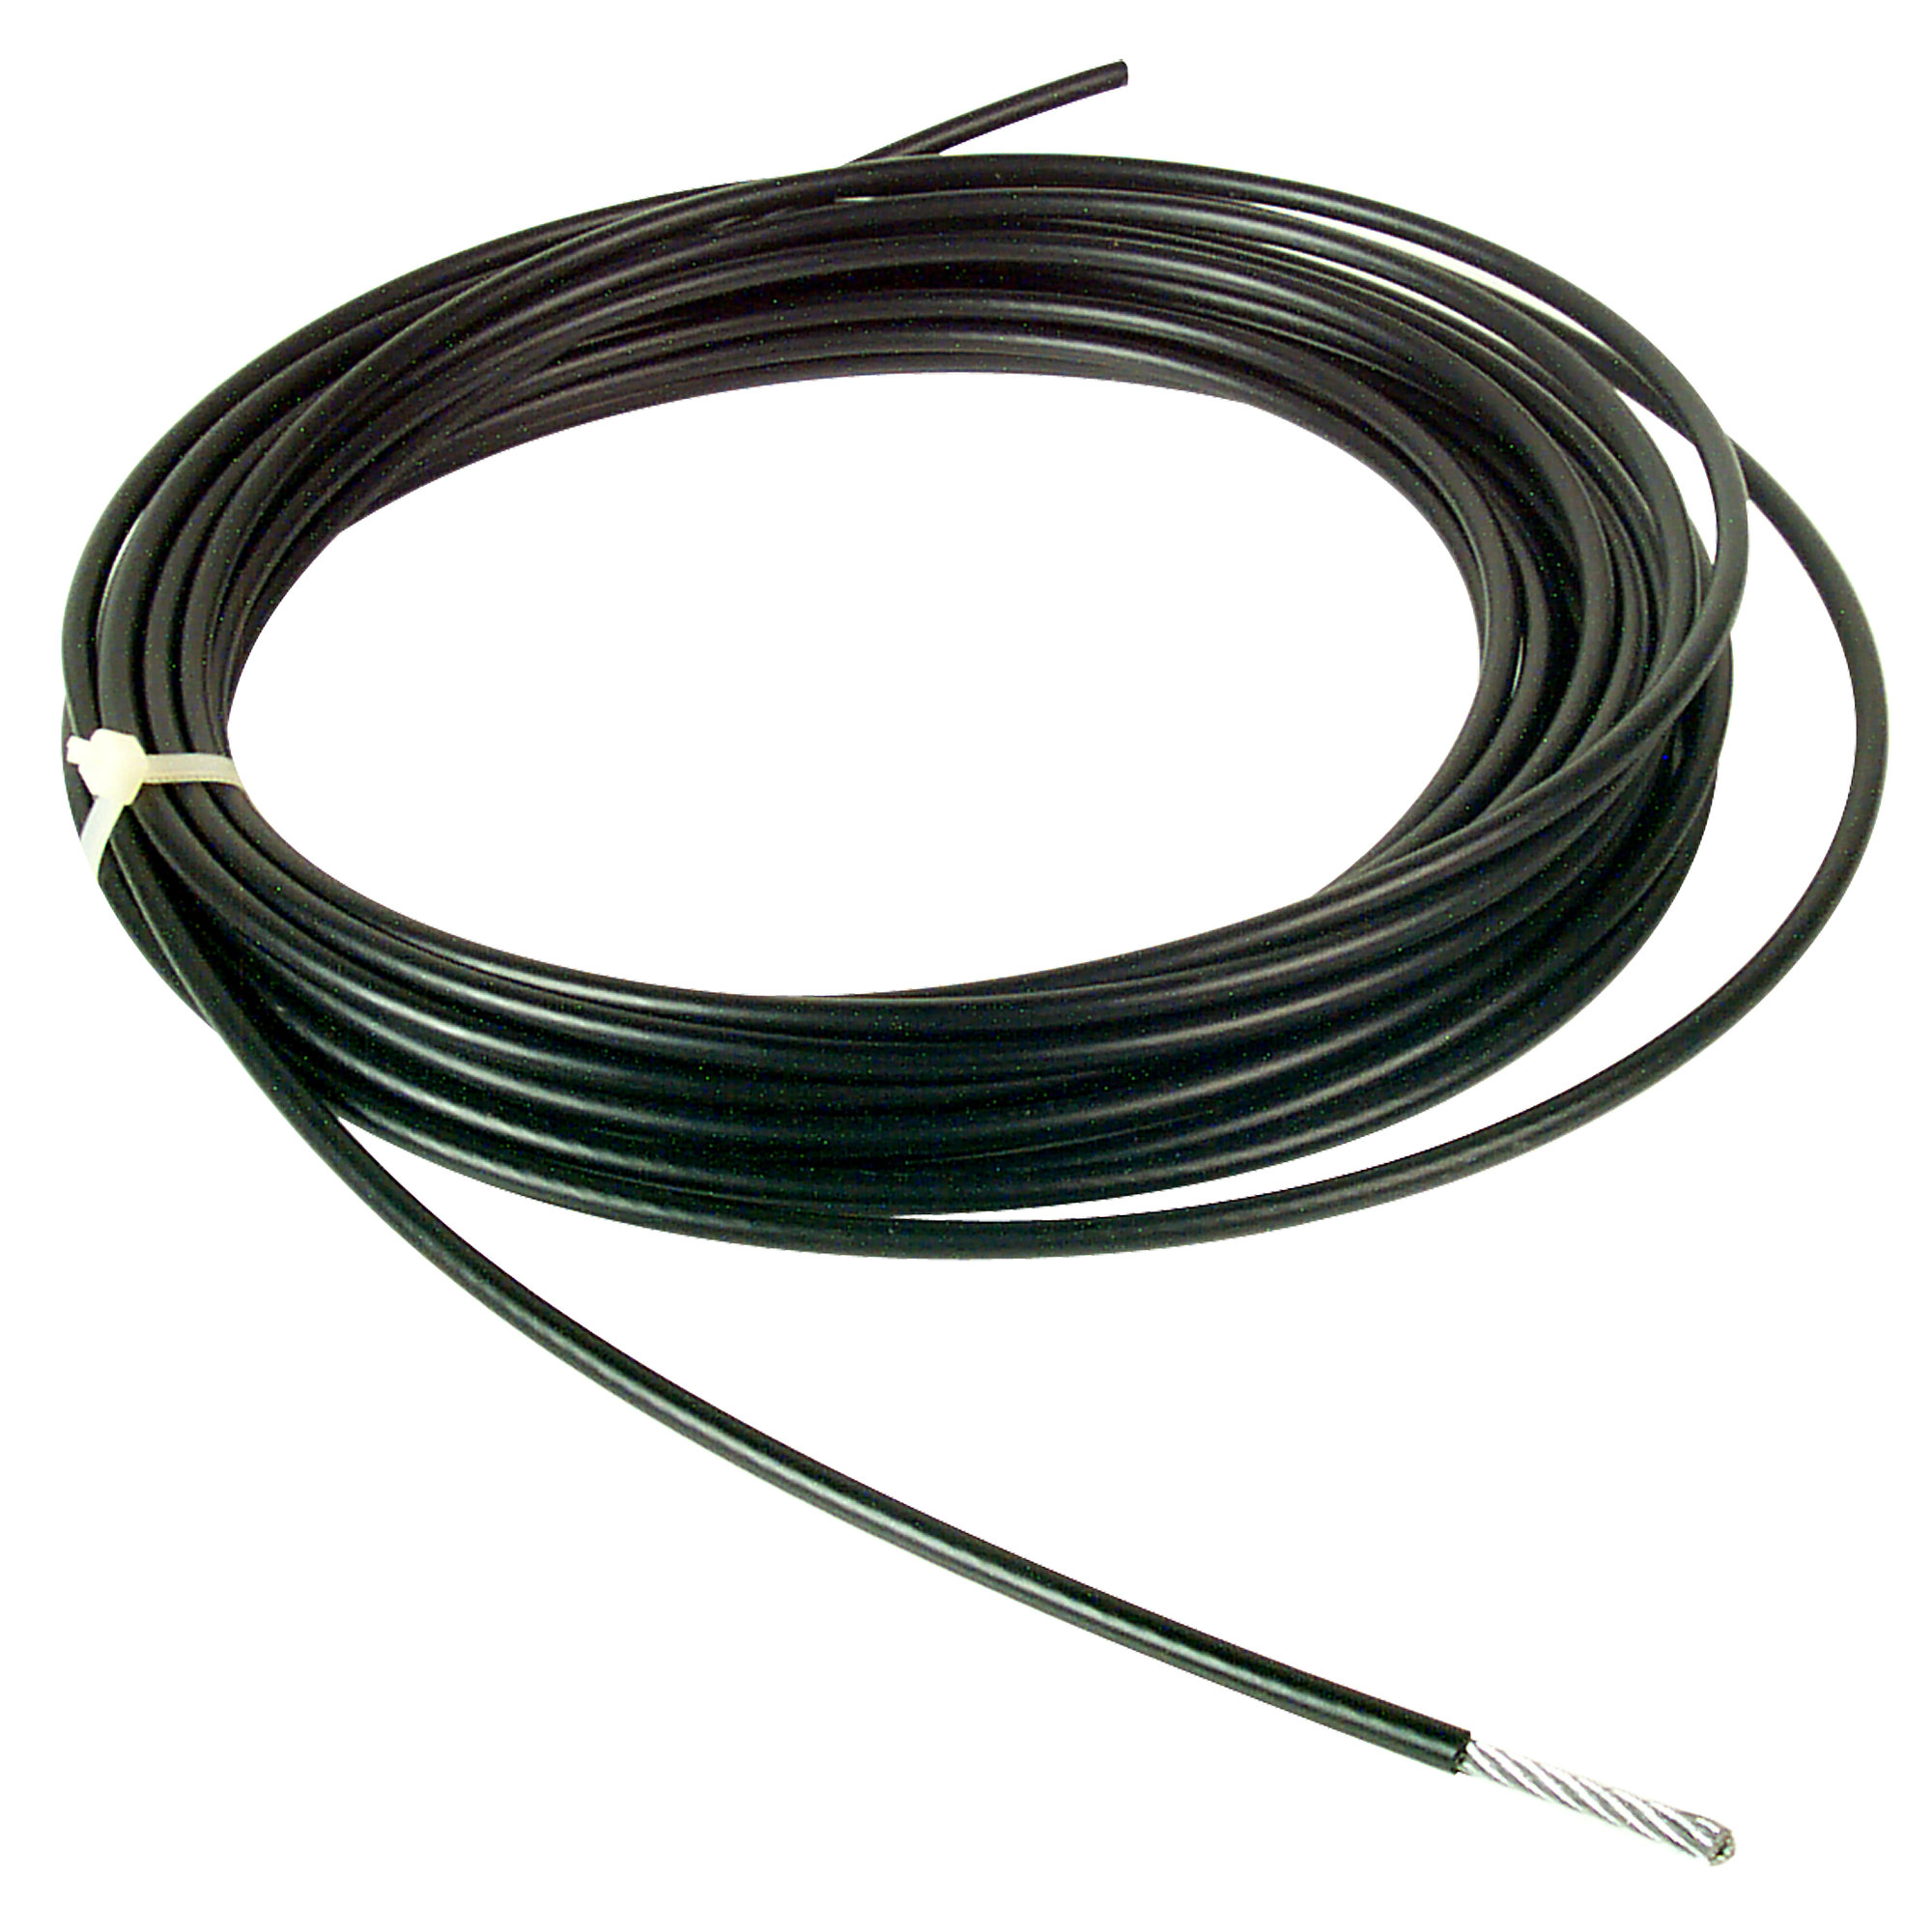 Cable for certain Freemotion Cable Cross Machines, 360"